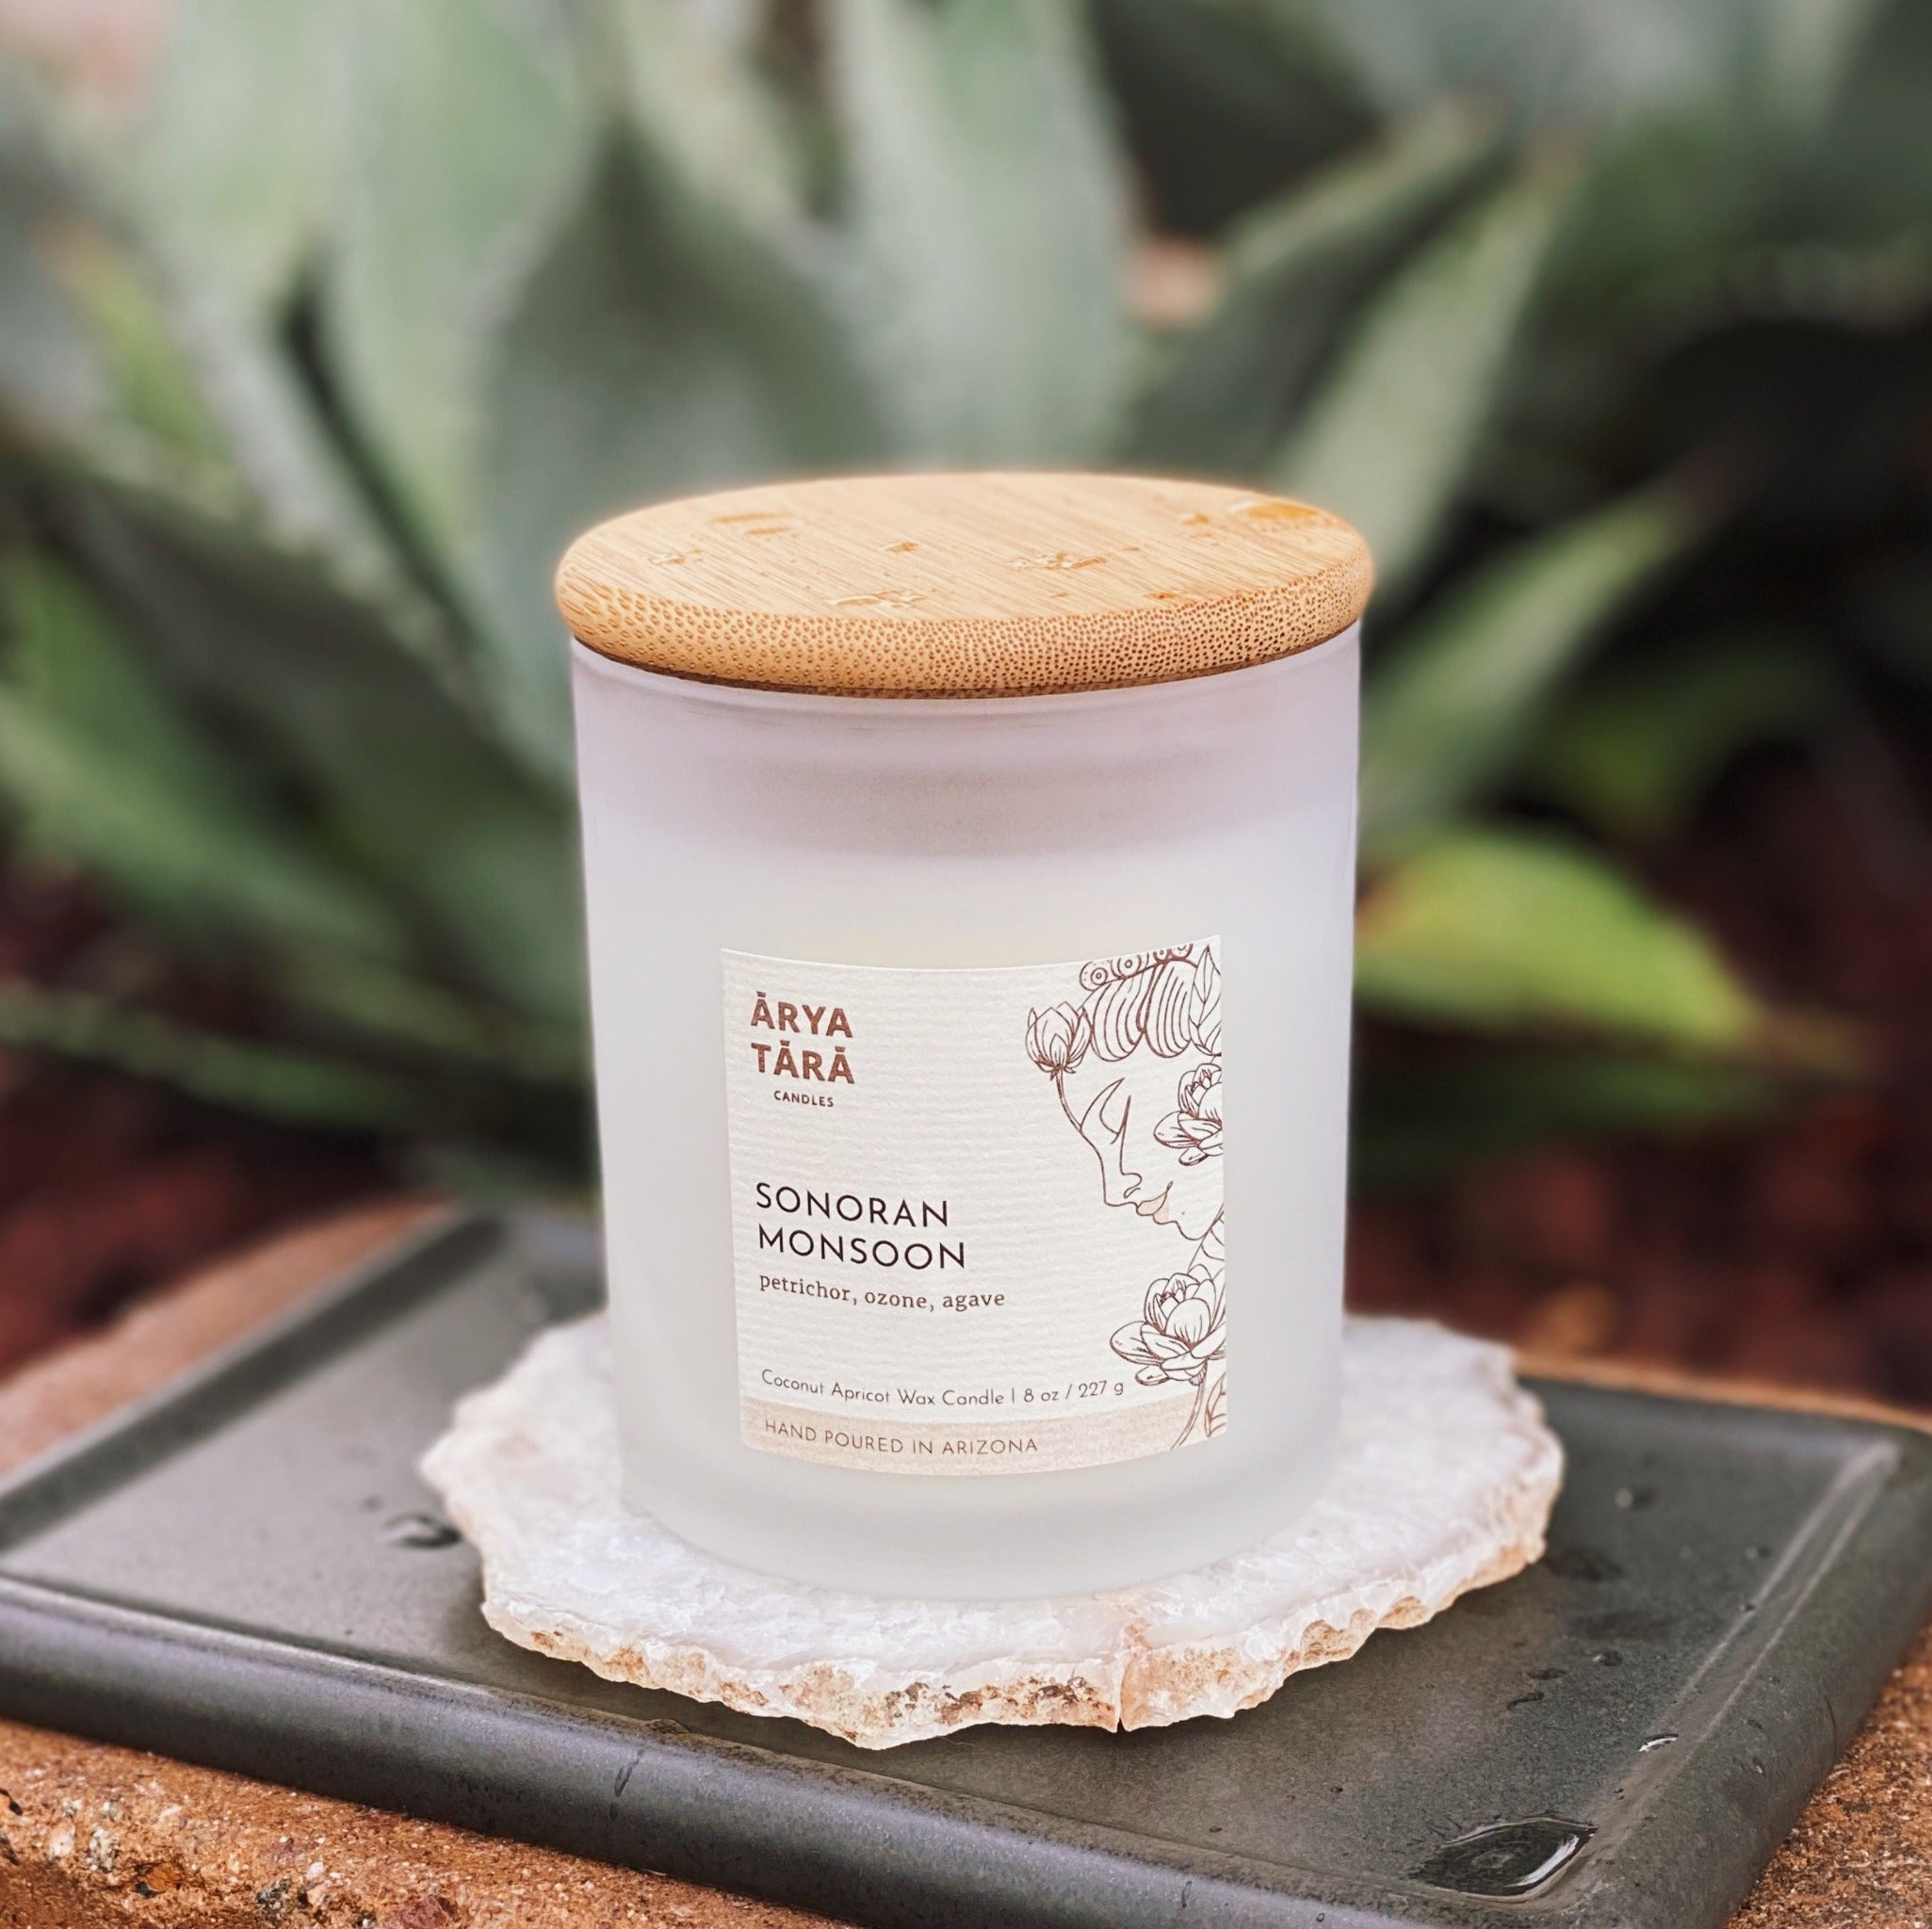 Sonoran Monsoon Candle by Arya Tara Candles. Humid desert air, damp clay soil and agave leaves showered with raindrops. Ozone, petrichor, agave leaves. Arizona inspired candle. Monsoon rain scent. Luxury candle, natural candle. Made in Tucson Arizona, hand poured candle in small batch. Non-toxic natural candle made with coconut apricot wax, lead-free zinc-free wicks, premium fragrances.